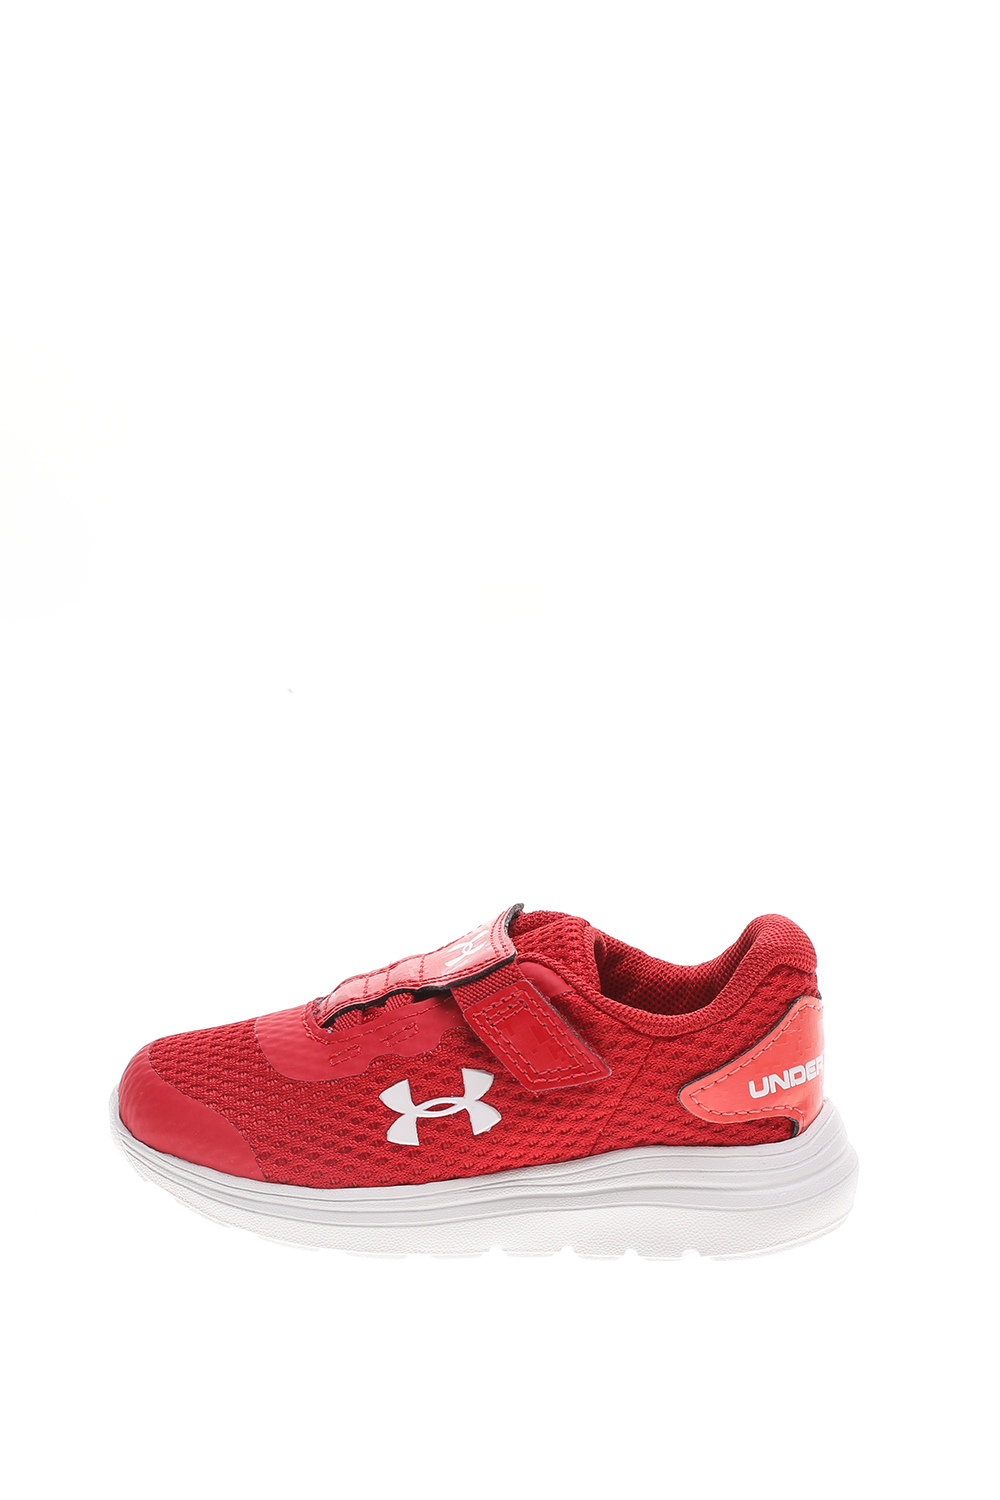 UNDER ARMOUR - Παιδικά αθλητικά παπούτσια UNDER ARMOUR Inf Surge 2 AC κόκκινα Παιδικά/Boys/Παπούτσια/Αθλητικά